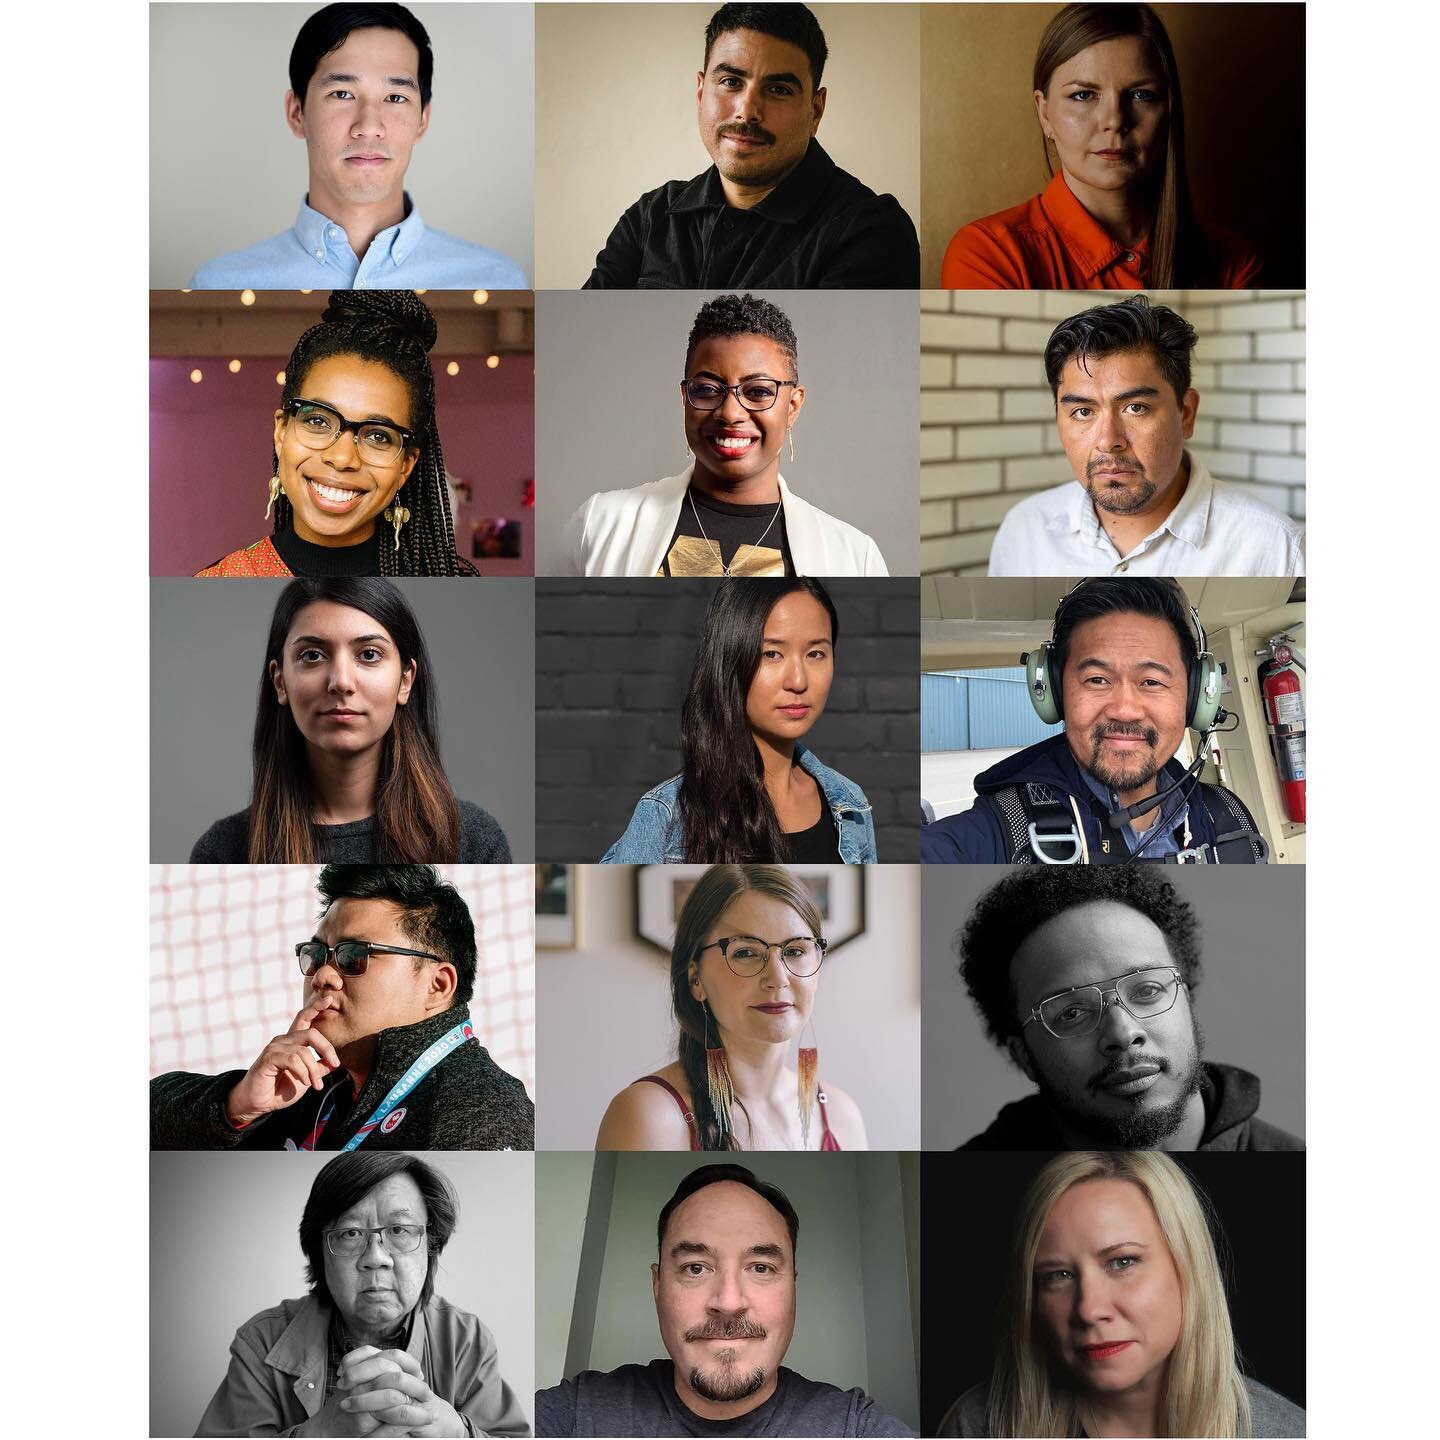 What a fine and talented bunch. Meet your 2022 Room Up Front team of mentors and organizers. They really are here to help and make room for you. Apply. Our deadline is Friday. Please help amplify.